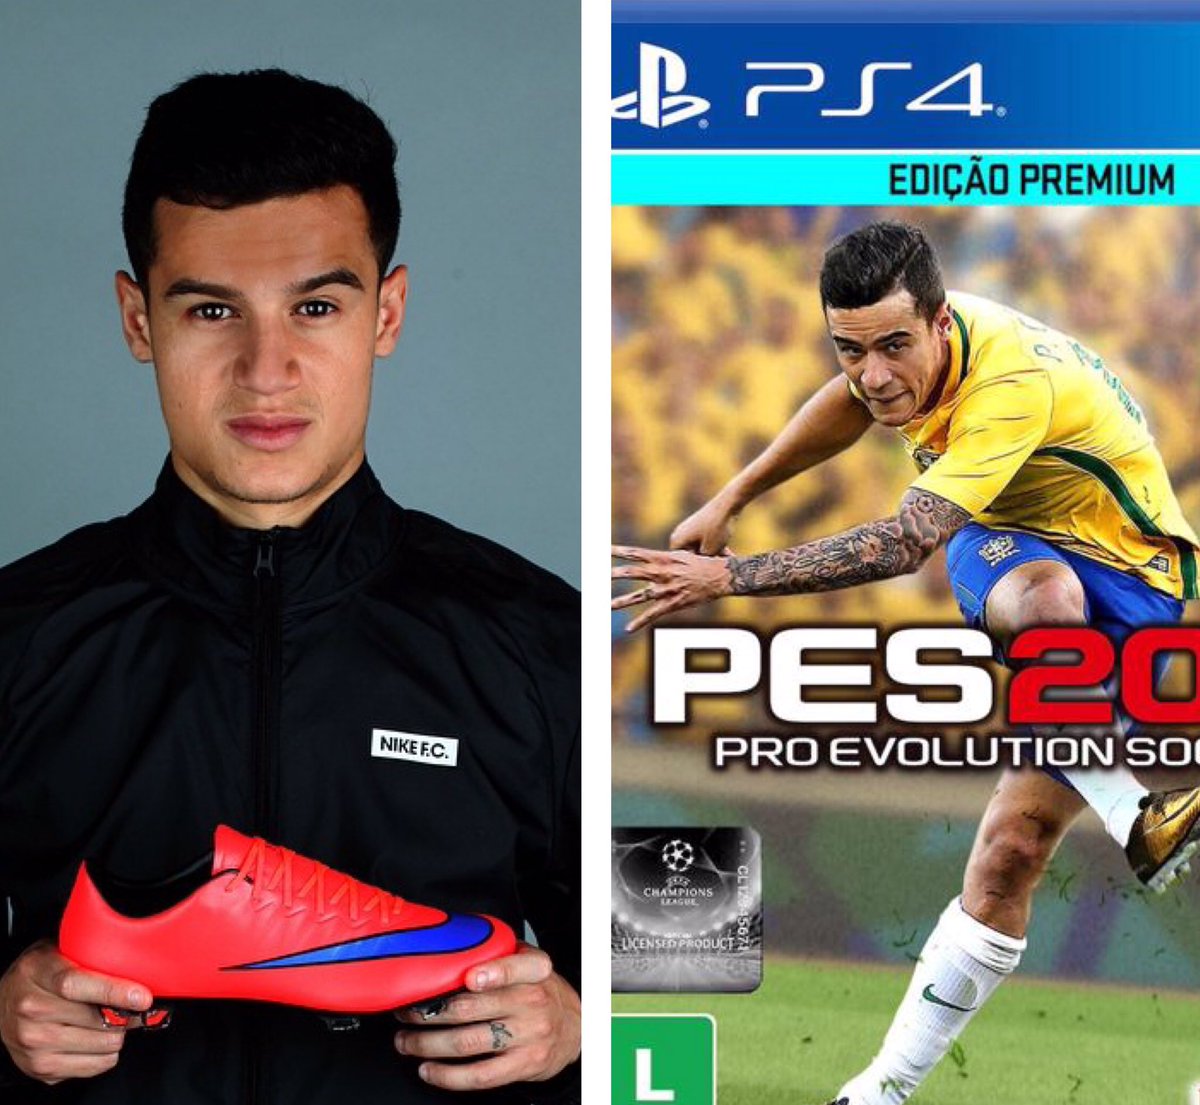 Sports Business Inst en Twitter: "Coutinho is sponsored by Nike &amp; PES Konami, two of FC Barcelona's club partners. Relevant consideration for potential commercial synergies /